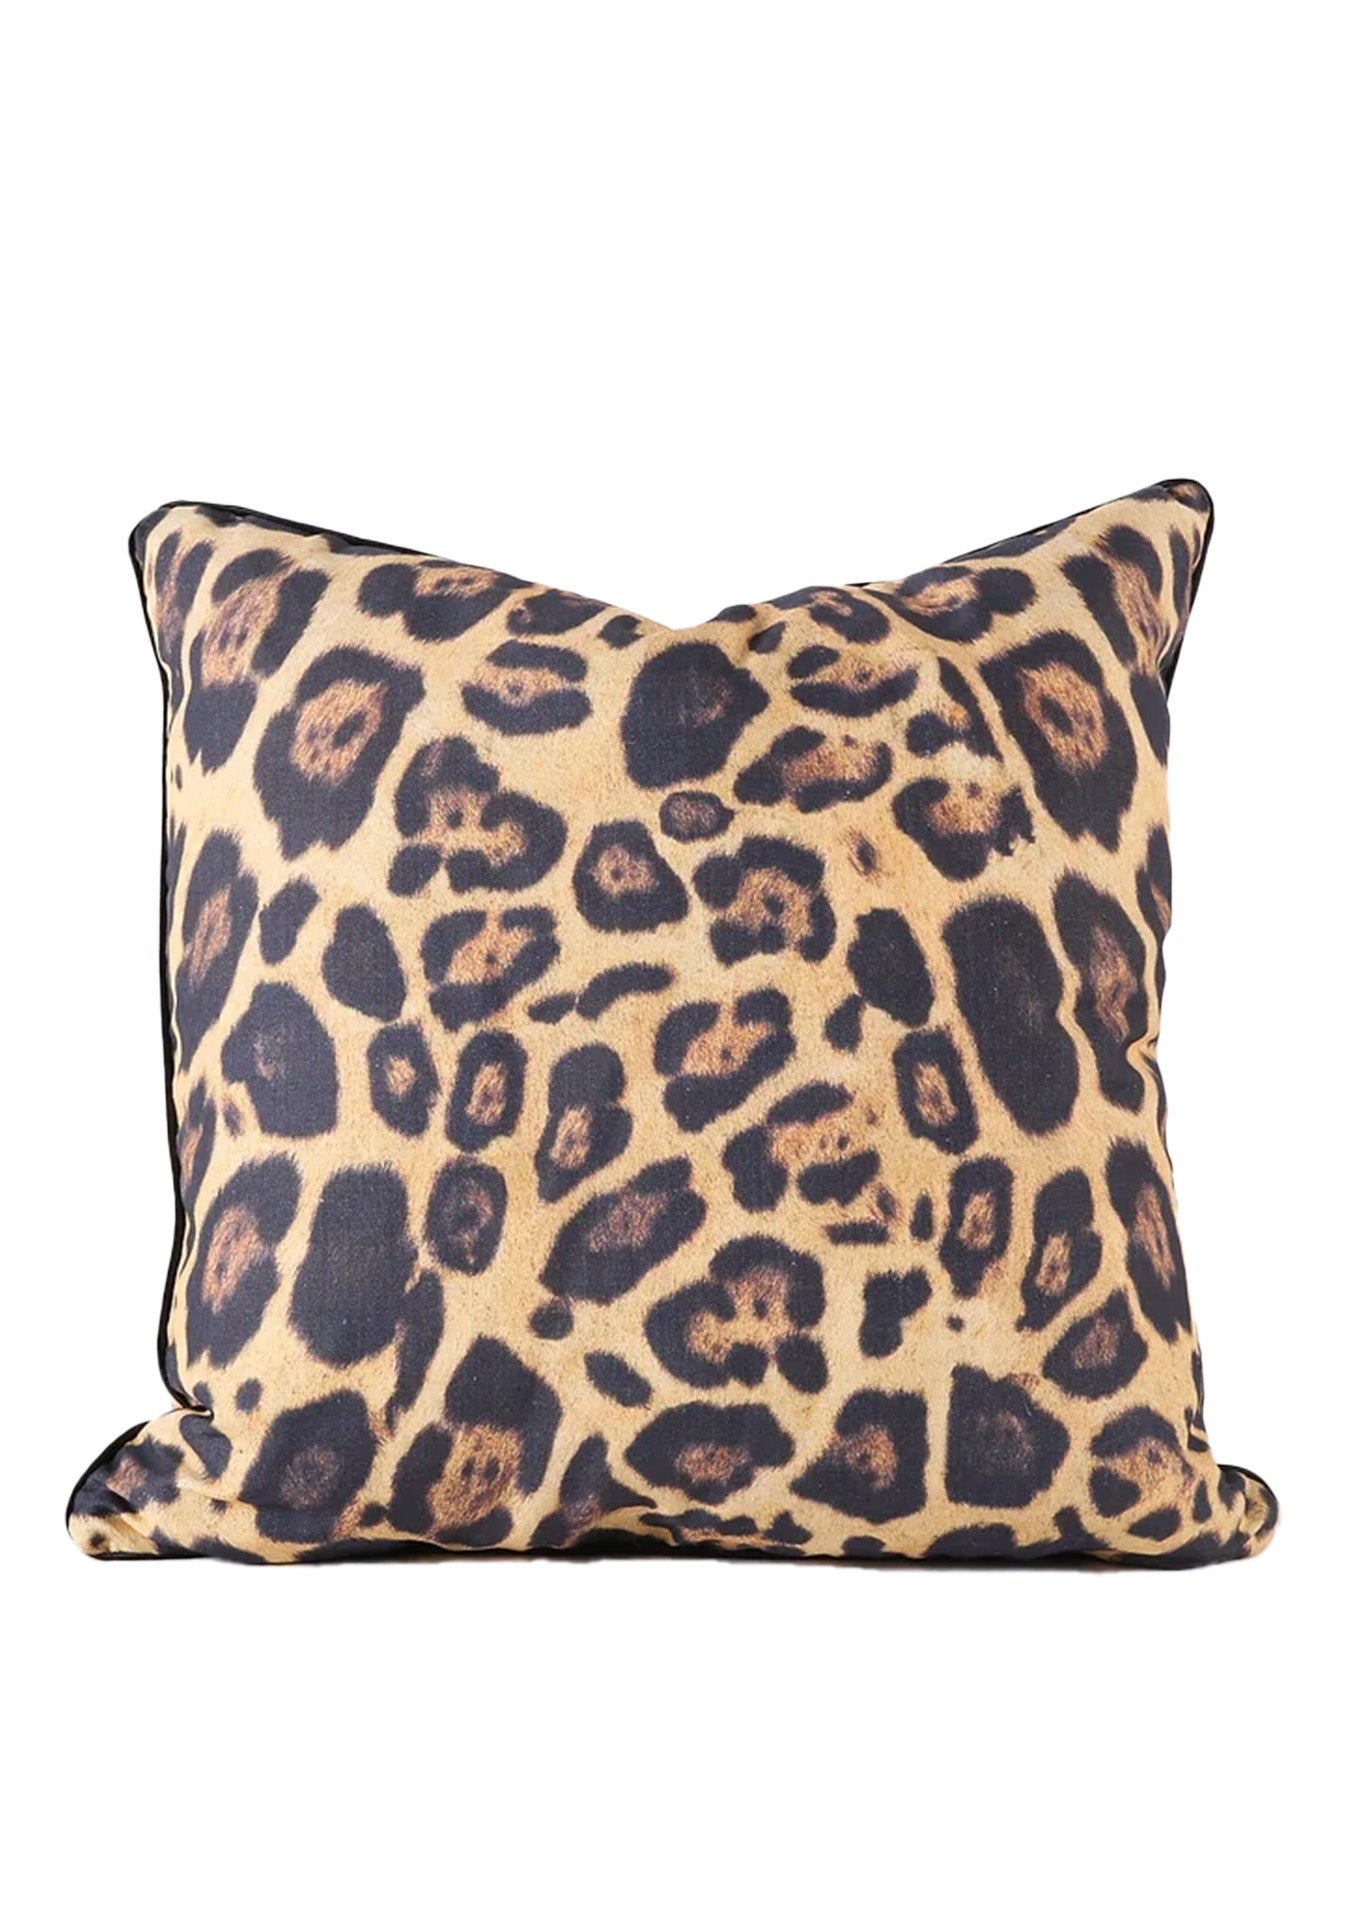 A decorative square Leopard Print with Black Cording 26x26 pillow in Arizona style, featuring shades of brown and black spots on a beige background, isolated against a white backdrop by Design Legacy.